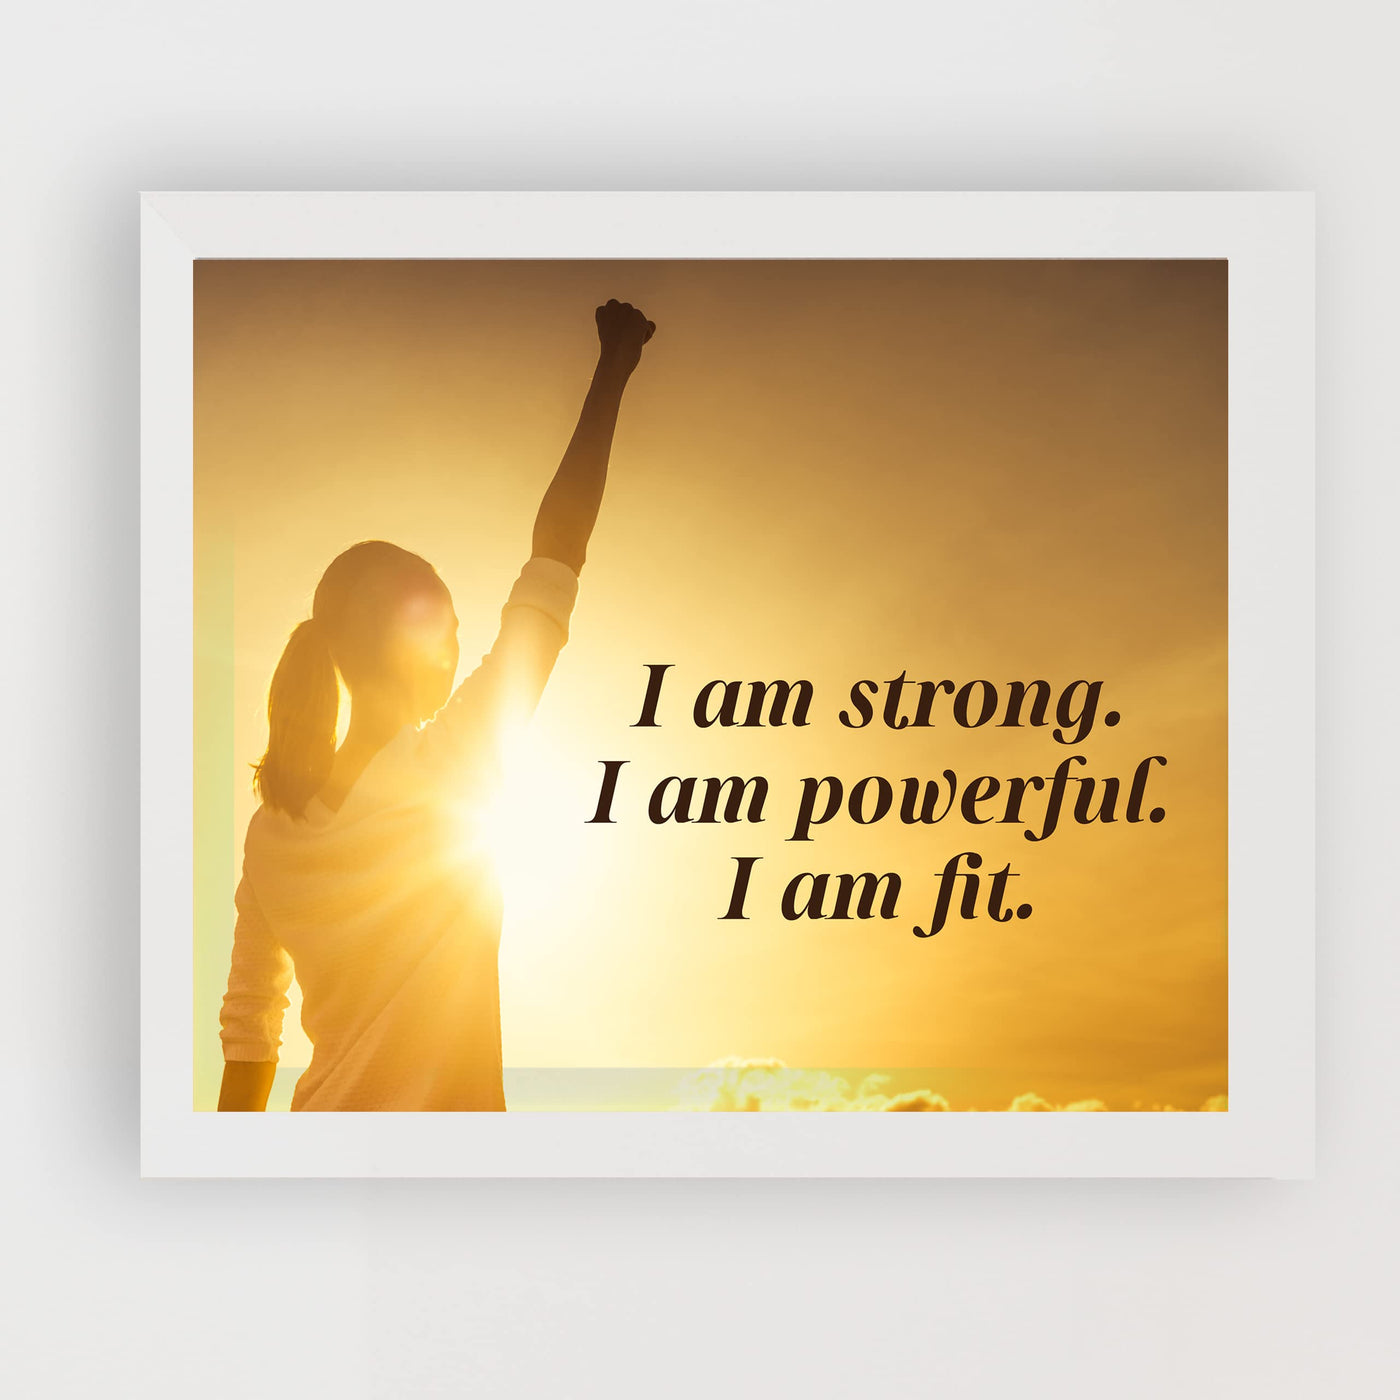 I Am Strong, Powerful, & Fit Motivational Quotes Wall Art -10x8" Exercise & Fitness Sunset Print -Ready to Frame. Inspirational Decor for Home-Office-School-Gym-Studio. Great Gift for Motivation!